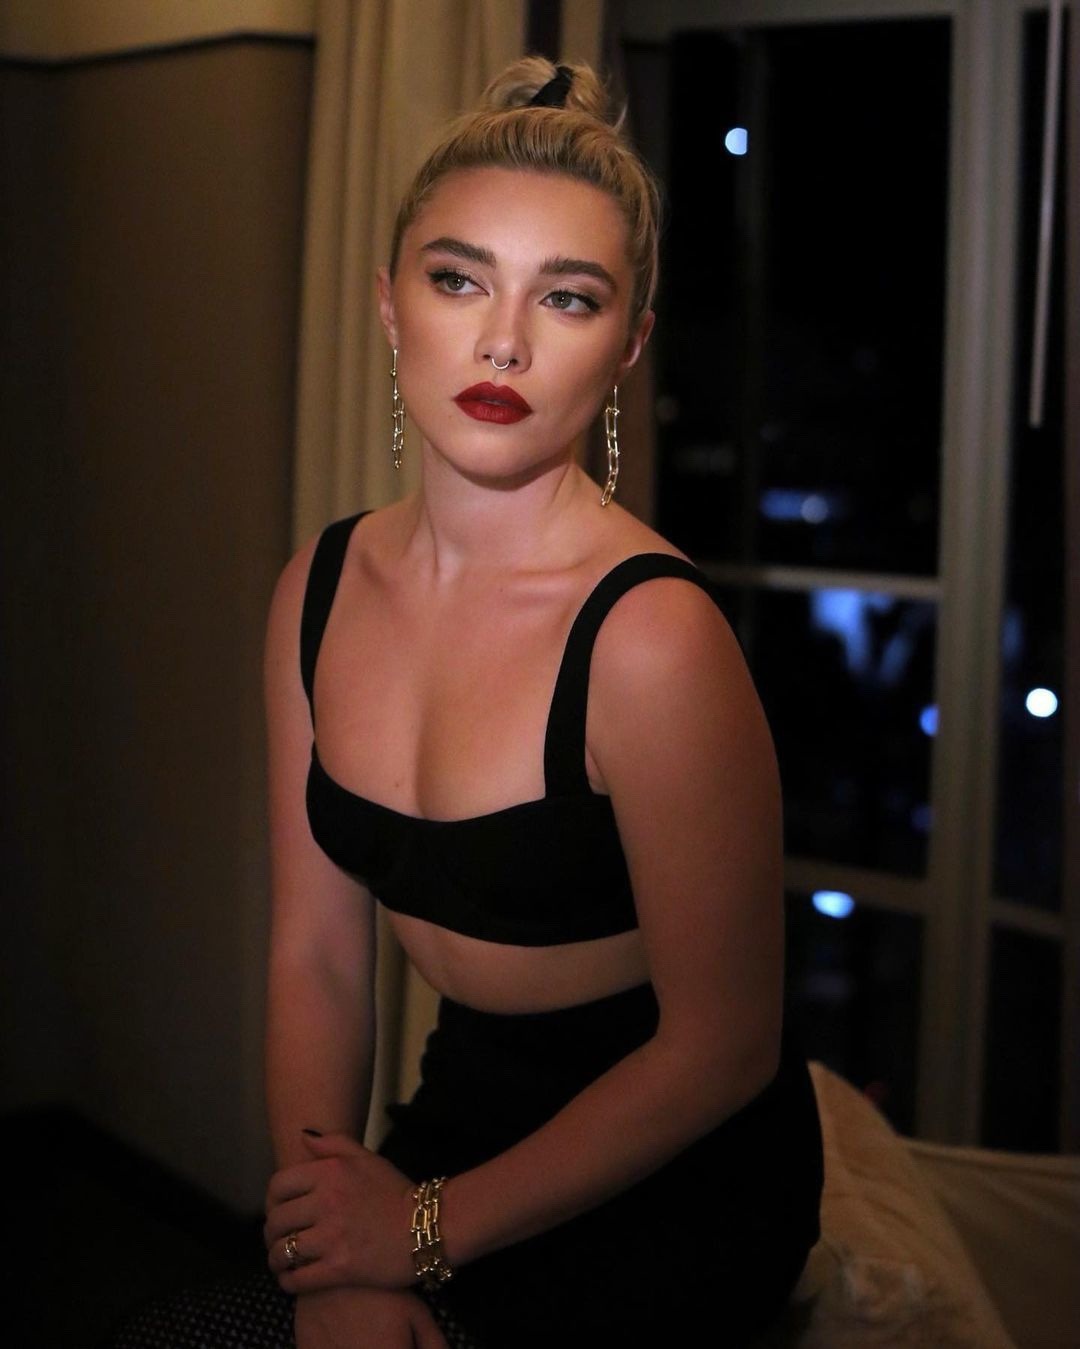 Sex allthethingspdx:Florence Pugh pictures